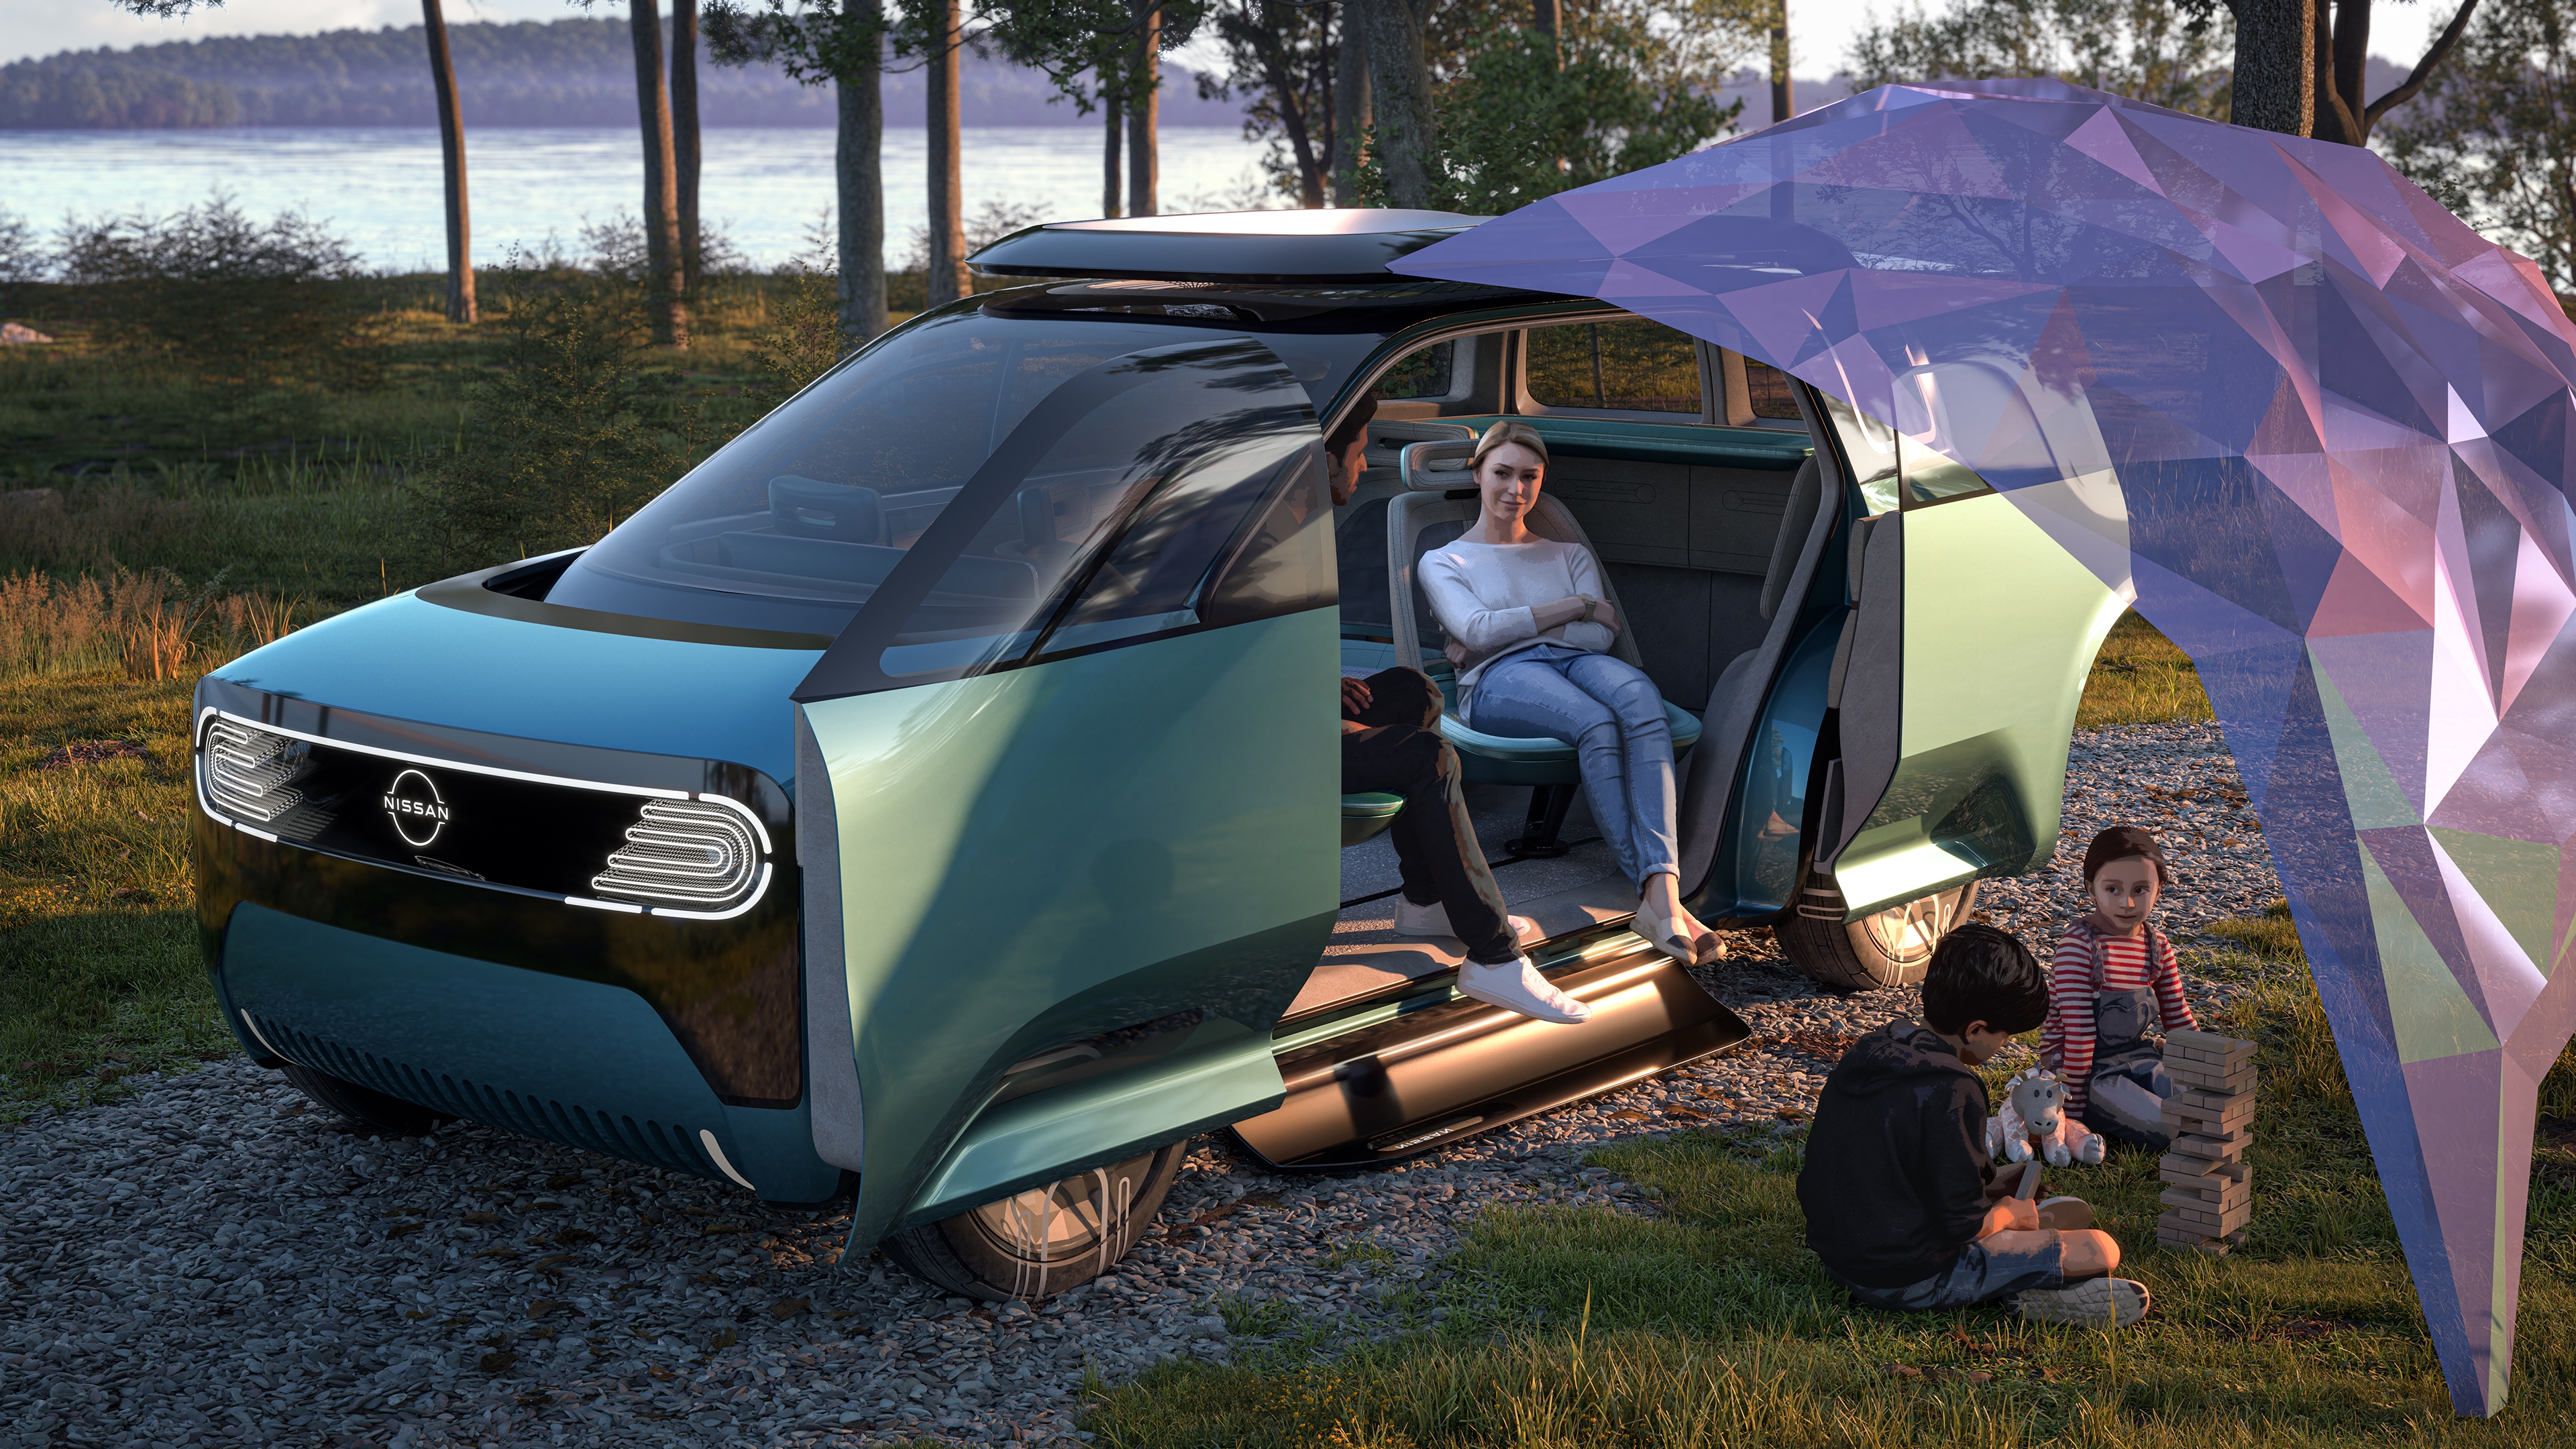 2021 Nissan Chill Out Concept